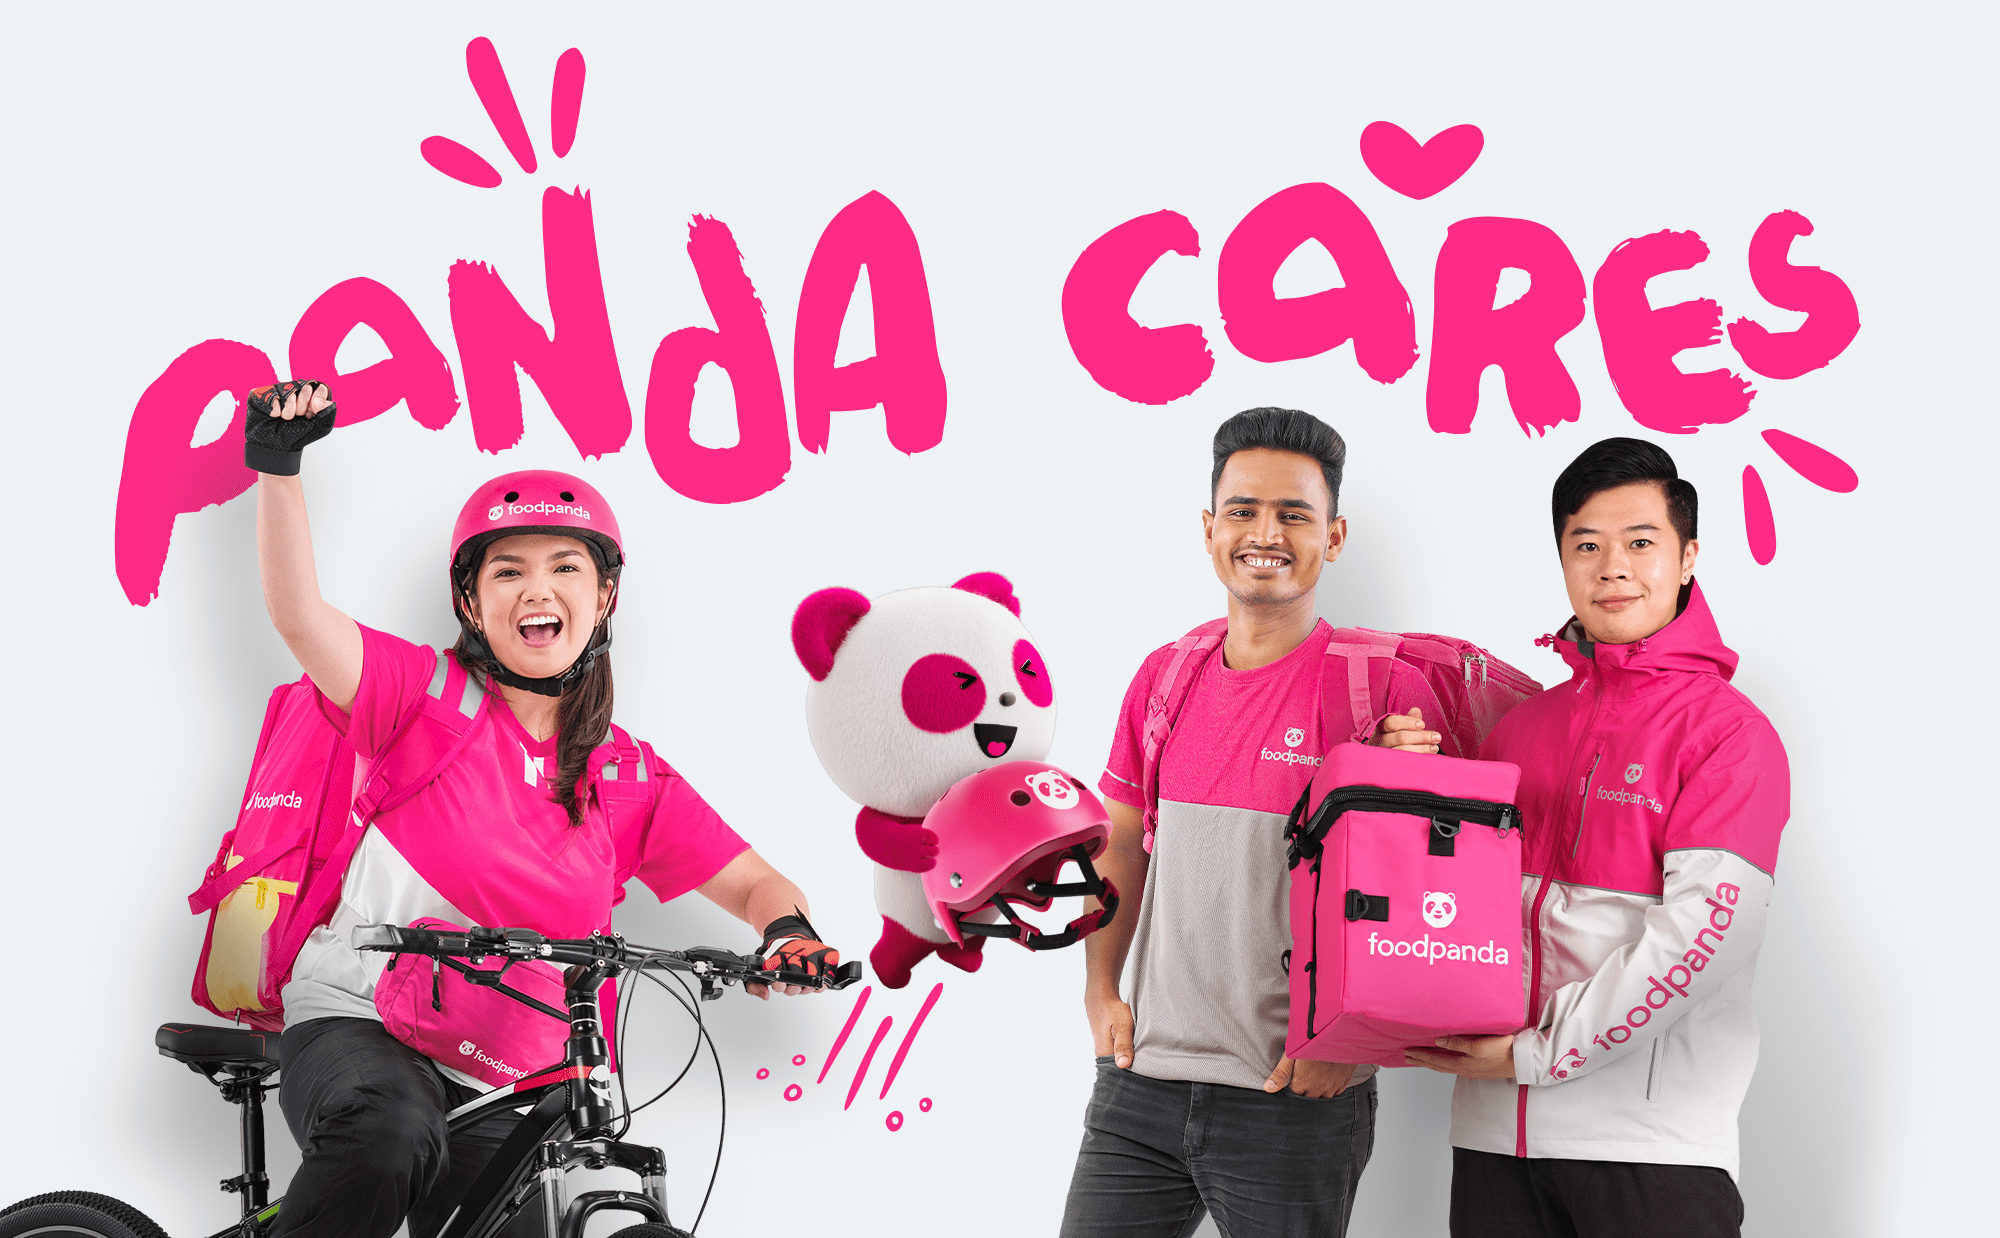 Image - foodpanda reaffirms commitment to enhance delivery partners’ work experience with ‘panda cares’ 